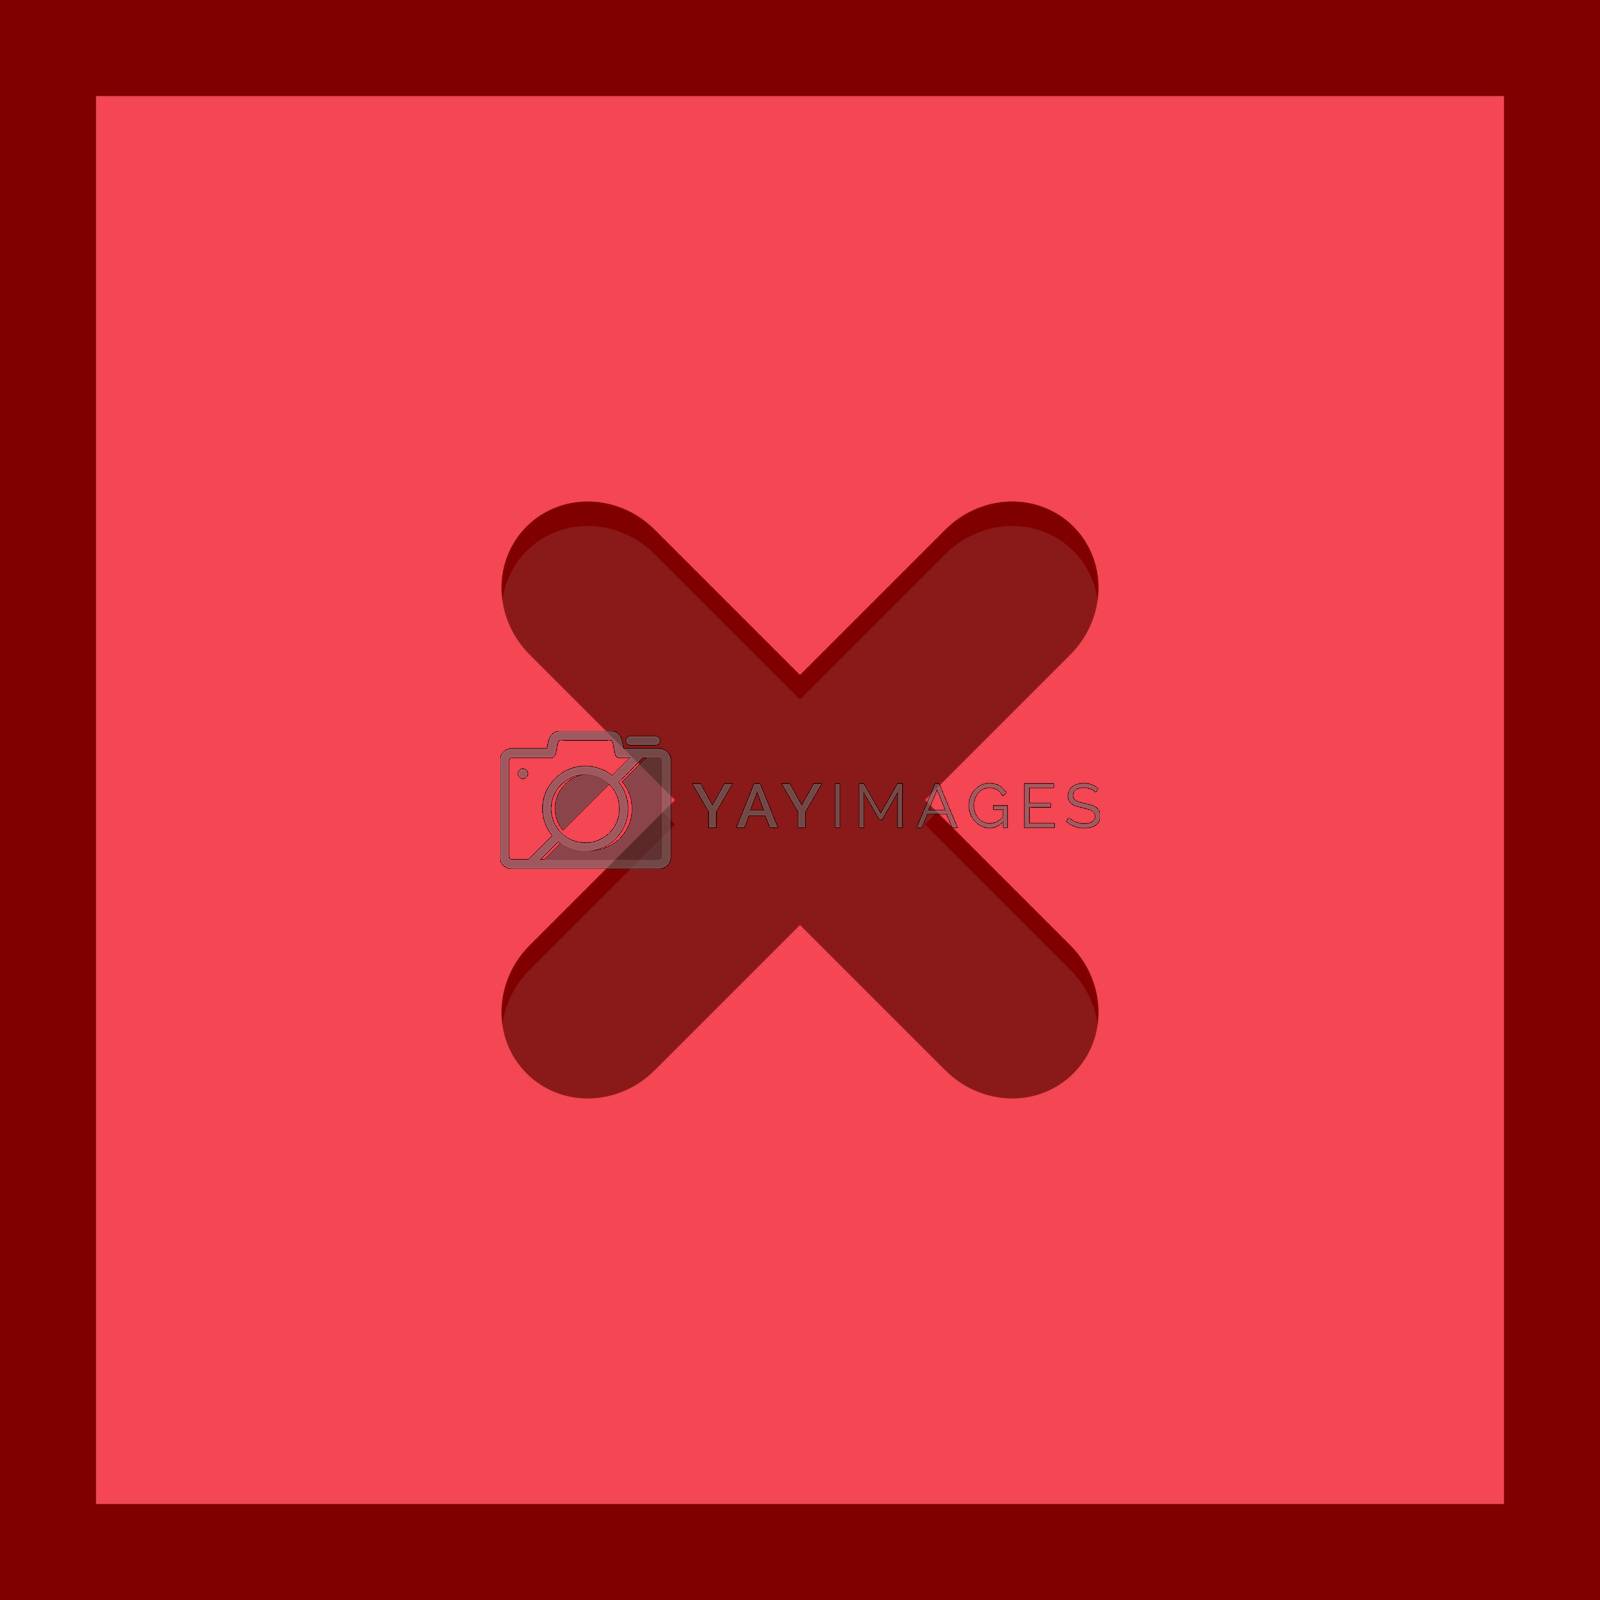 Royalty free image of Wrong marks, Cross marks, Rejected, Disapproved, No, False, Not  by Tsunami Designer